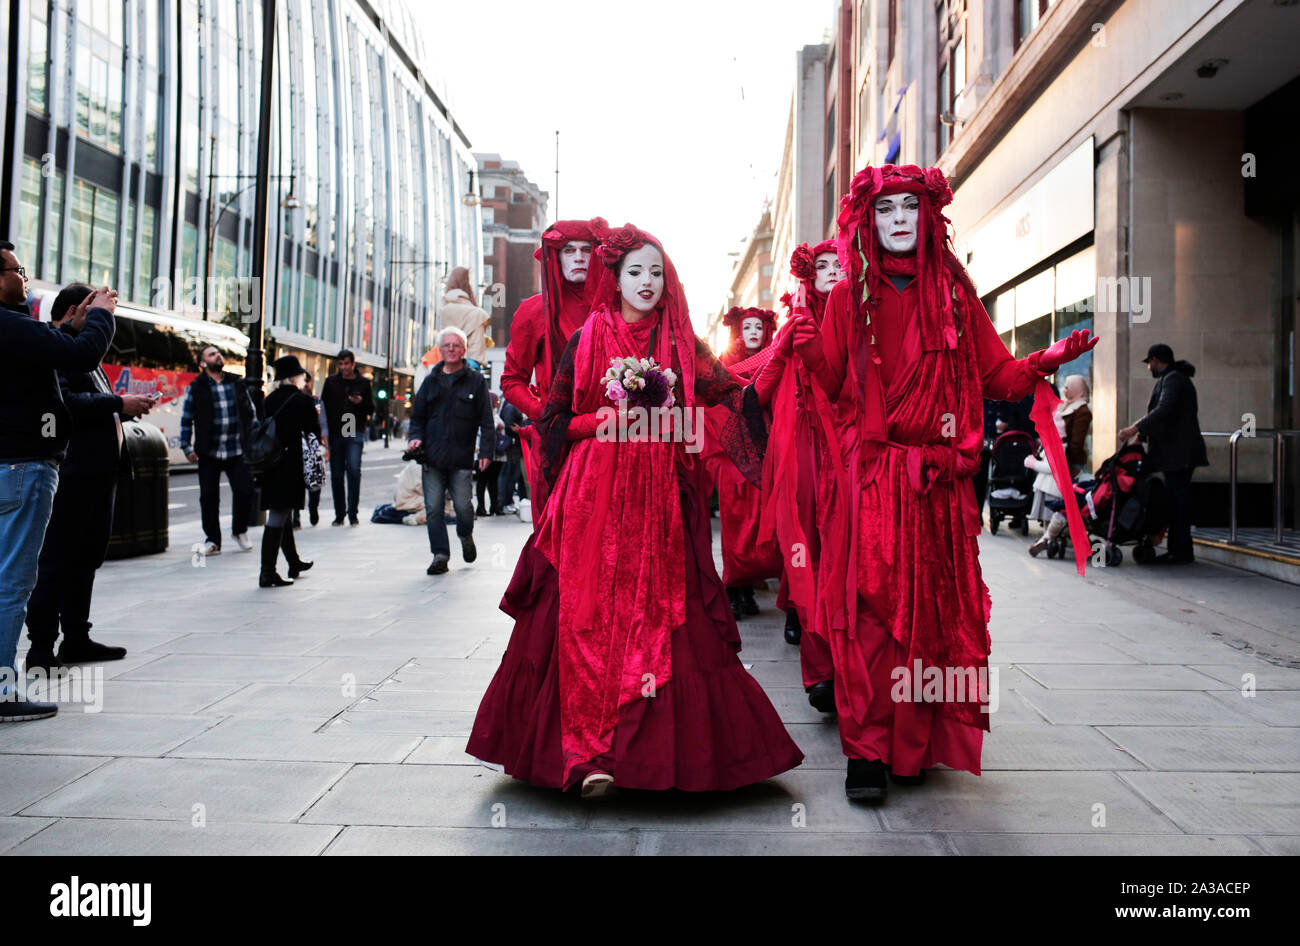 London, UK. 6th October 2019. Extinction Rebellion walk along Oxford Street at the start of two weeks of protests in which they plan to block every single road into central London. Other protest are expected in about 60 cities around the world. Credit: Stuart Boulton/Alamy Stock Photo